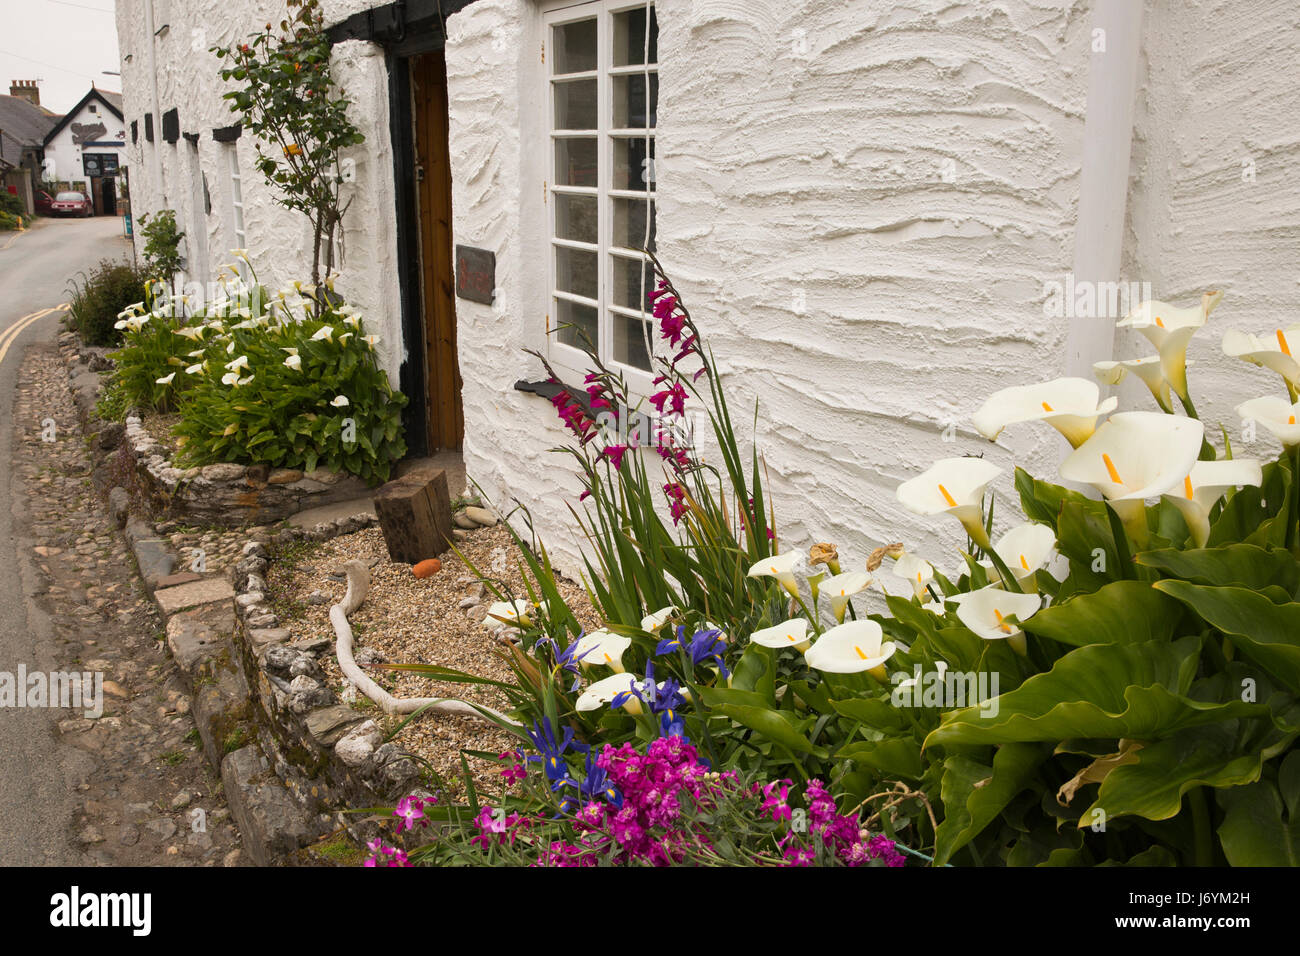 UK, Cornwall, St Austell, Polkerris, floral display in front garden of small fishermen’s cottage Stock Photo